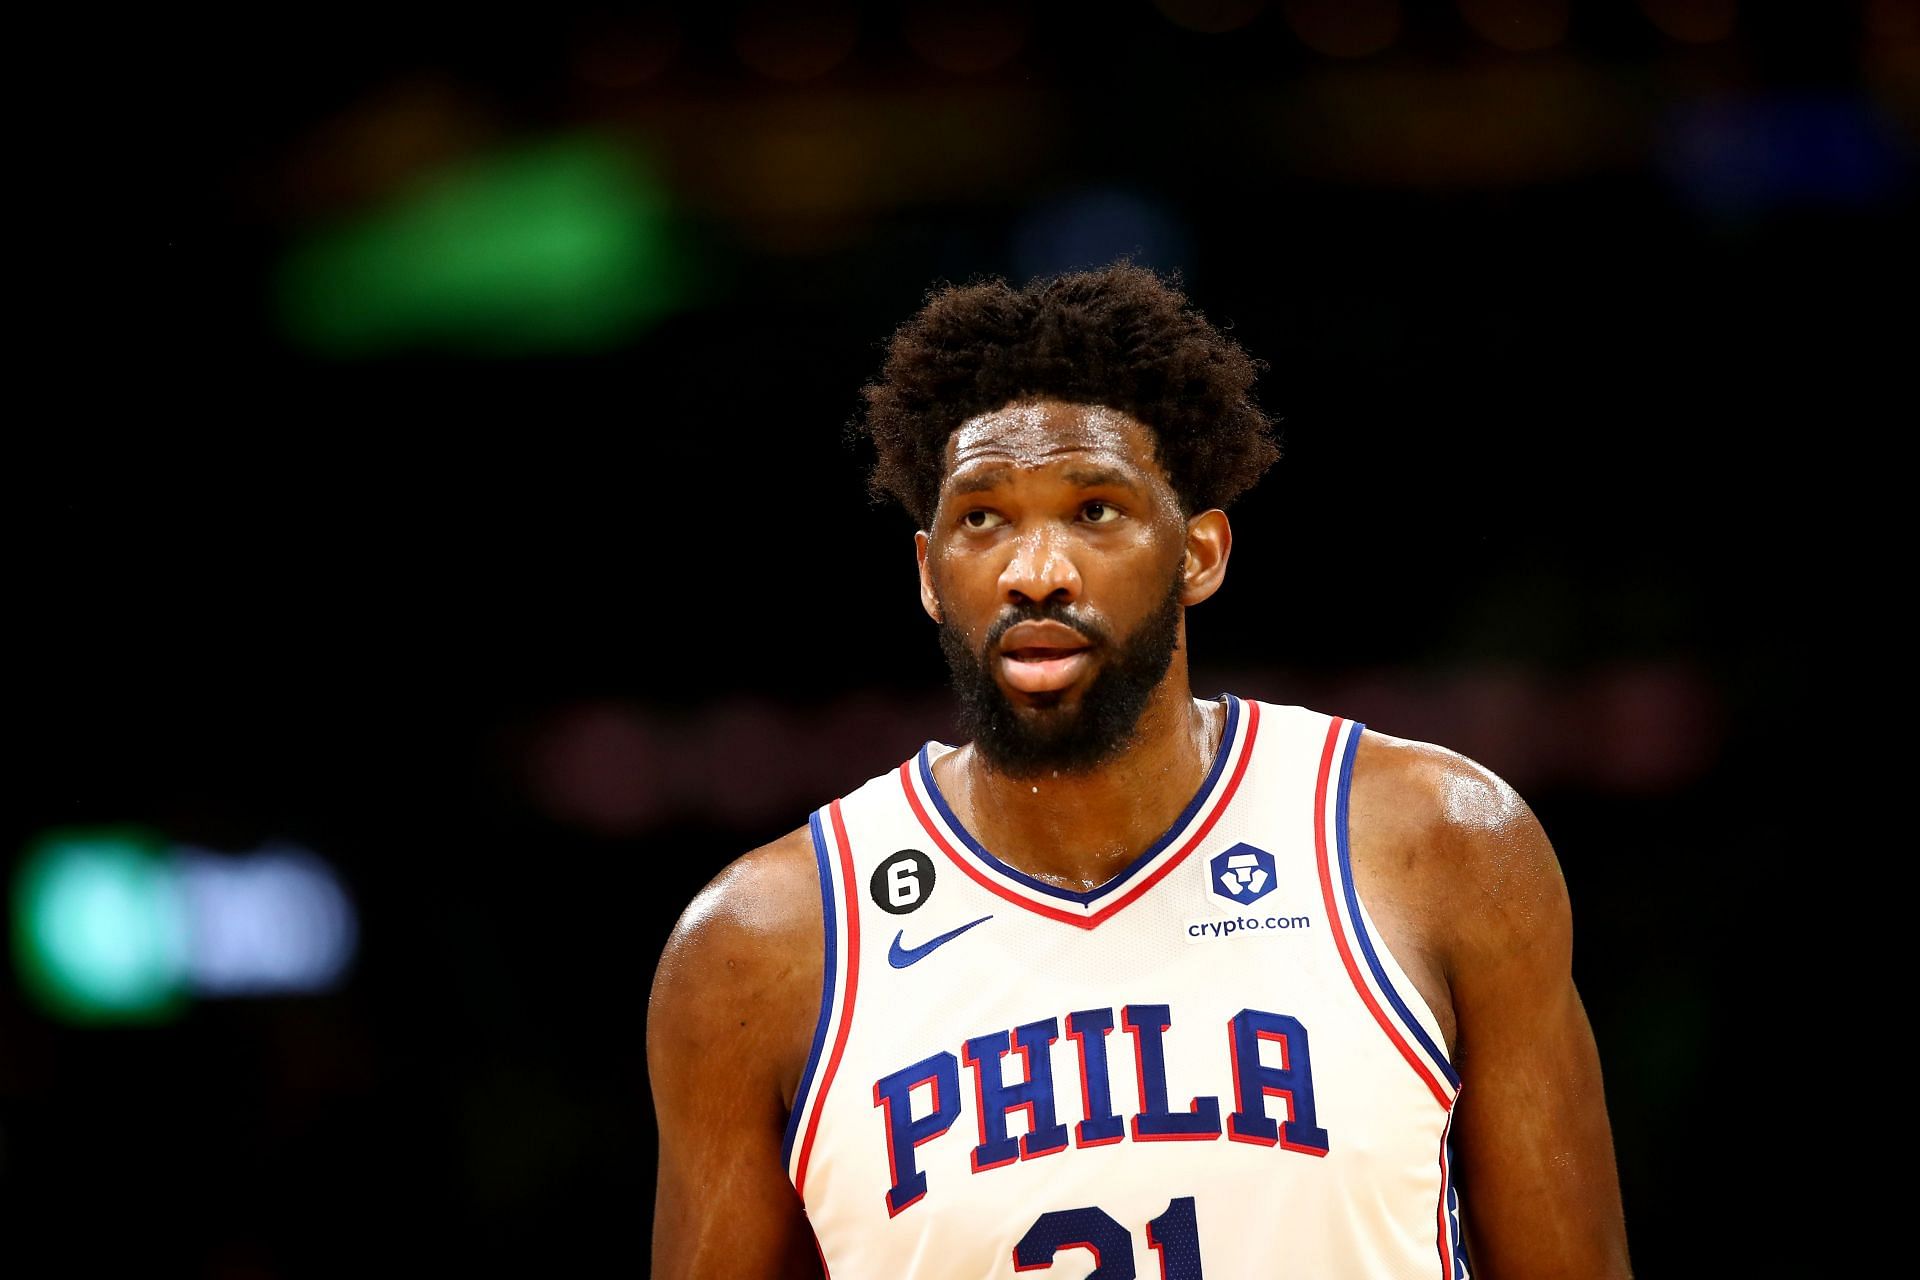 “I’m gonna give Joel Embiid a small pass” – Skip Bayless gives Embiid ...